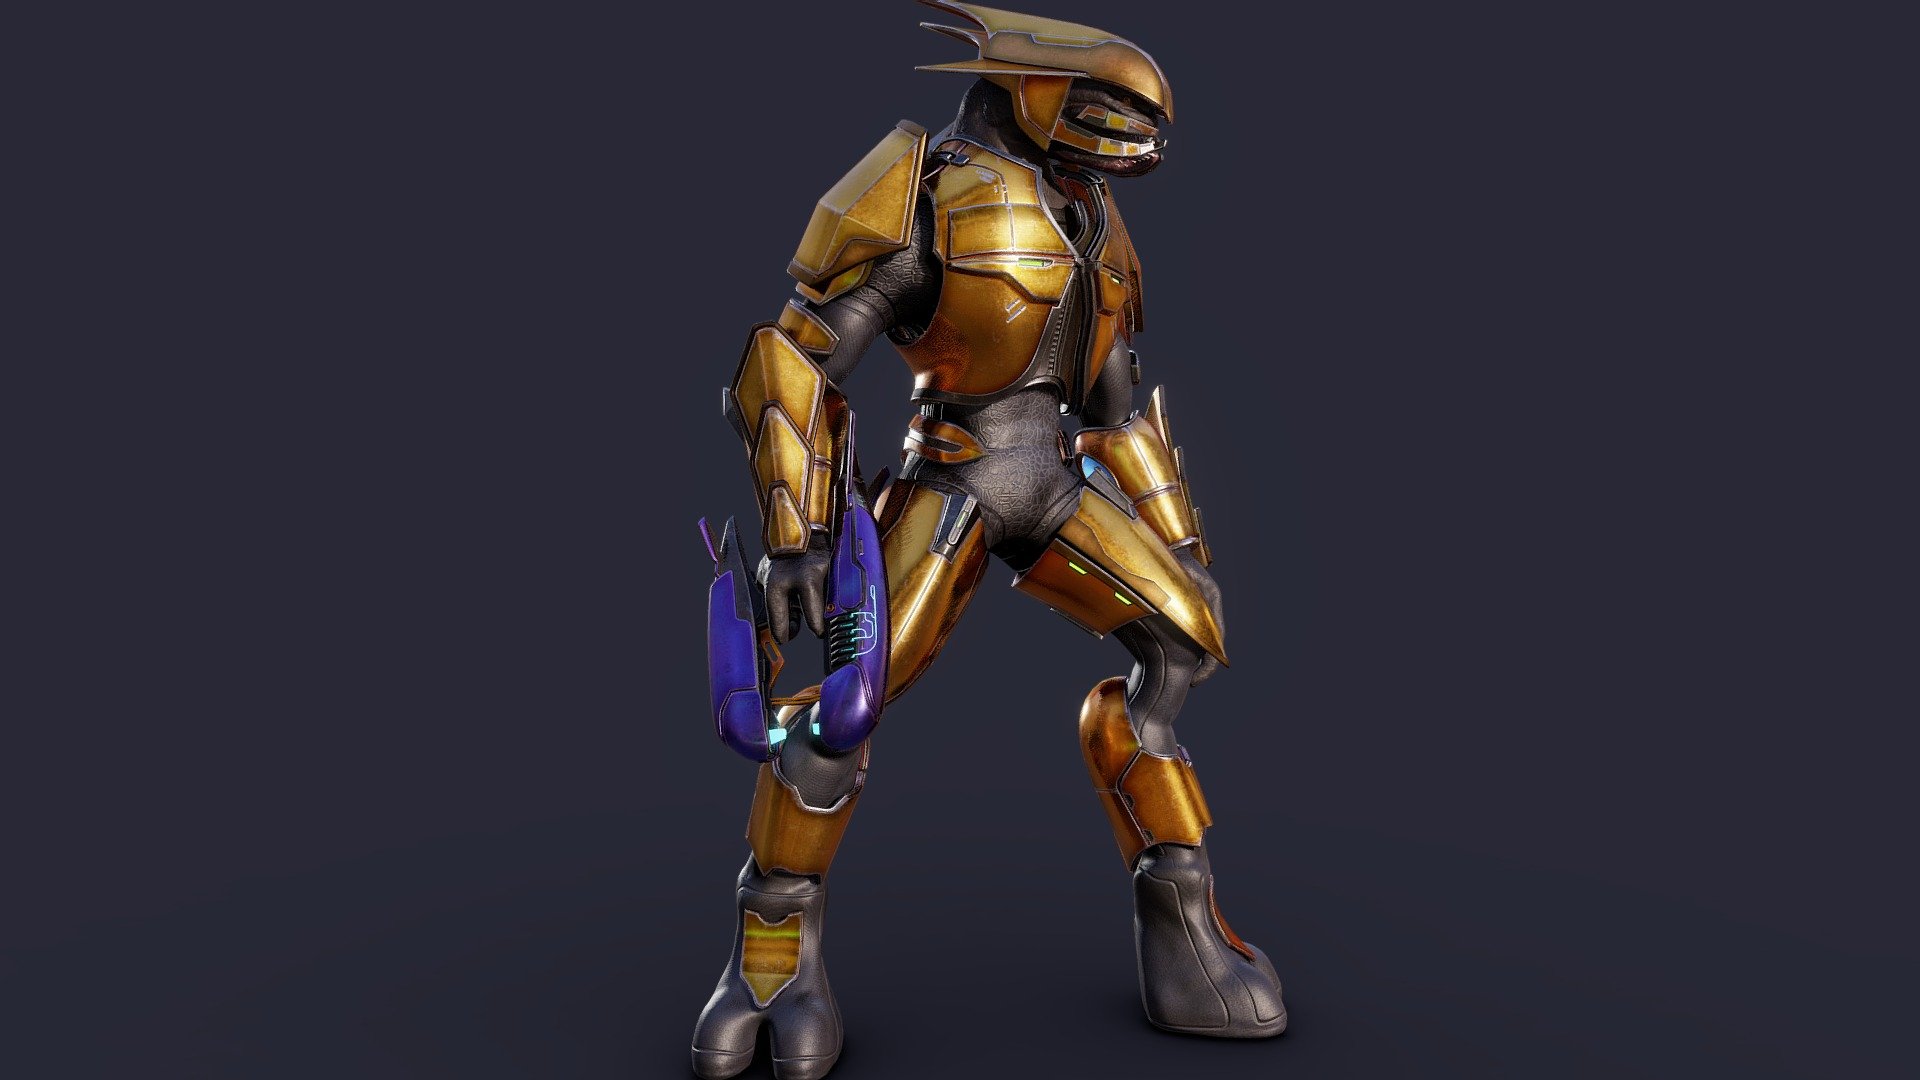 This is my first time making 3D character art, so it took long to make this model. I was never satisfied with the body and textures of the Elite, so I was constantly changing and adding things. After the Elite was finally finished, I decided out of the blue that the Elite needed a plasma rifle. Then I had to model that gun too, which also took a million years&hellip;
However, it was the most fun personal project I've ever done, and I learned so much from it! I will definitely be making more character art in the future.

The alien in question is a Covenant Elite Zealot or Sangheili Zealot. I'm a huge fan of Halo and I was shocked to realize I've never done 3D Halo stuff before. So I chose to make an HD remake of the classic Halo CE elite zealot, with some of my own changes here and there. The cool, shiny gold armor never returned in any of the Halo games that came after CE, so this is my interpretation if the design ever got properly remastered/remade 3d model